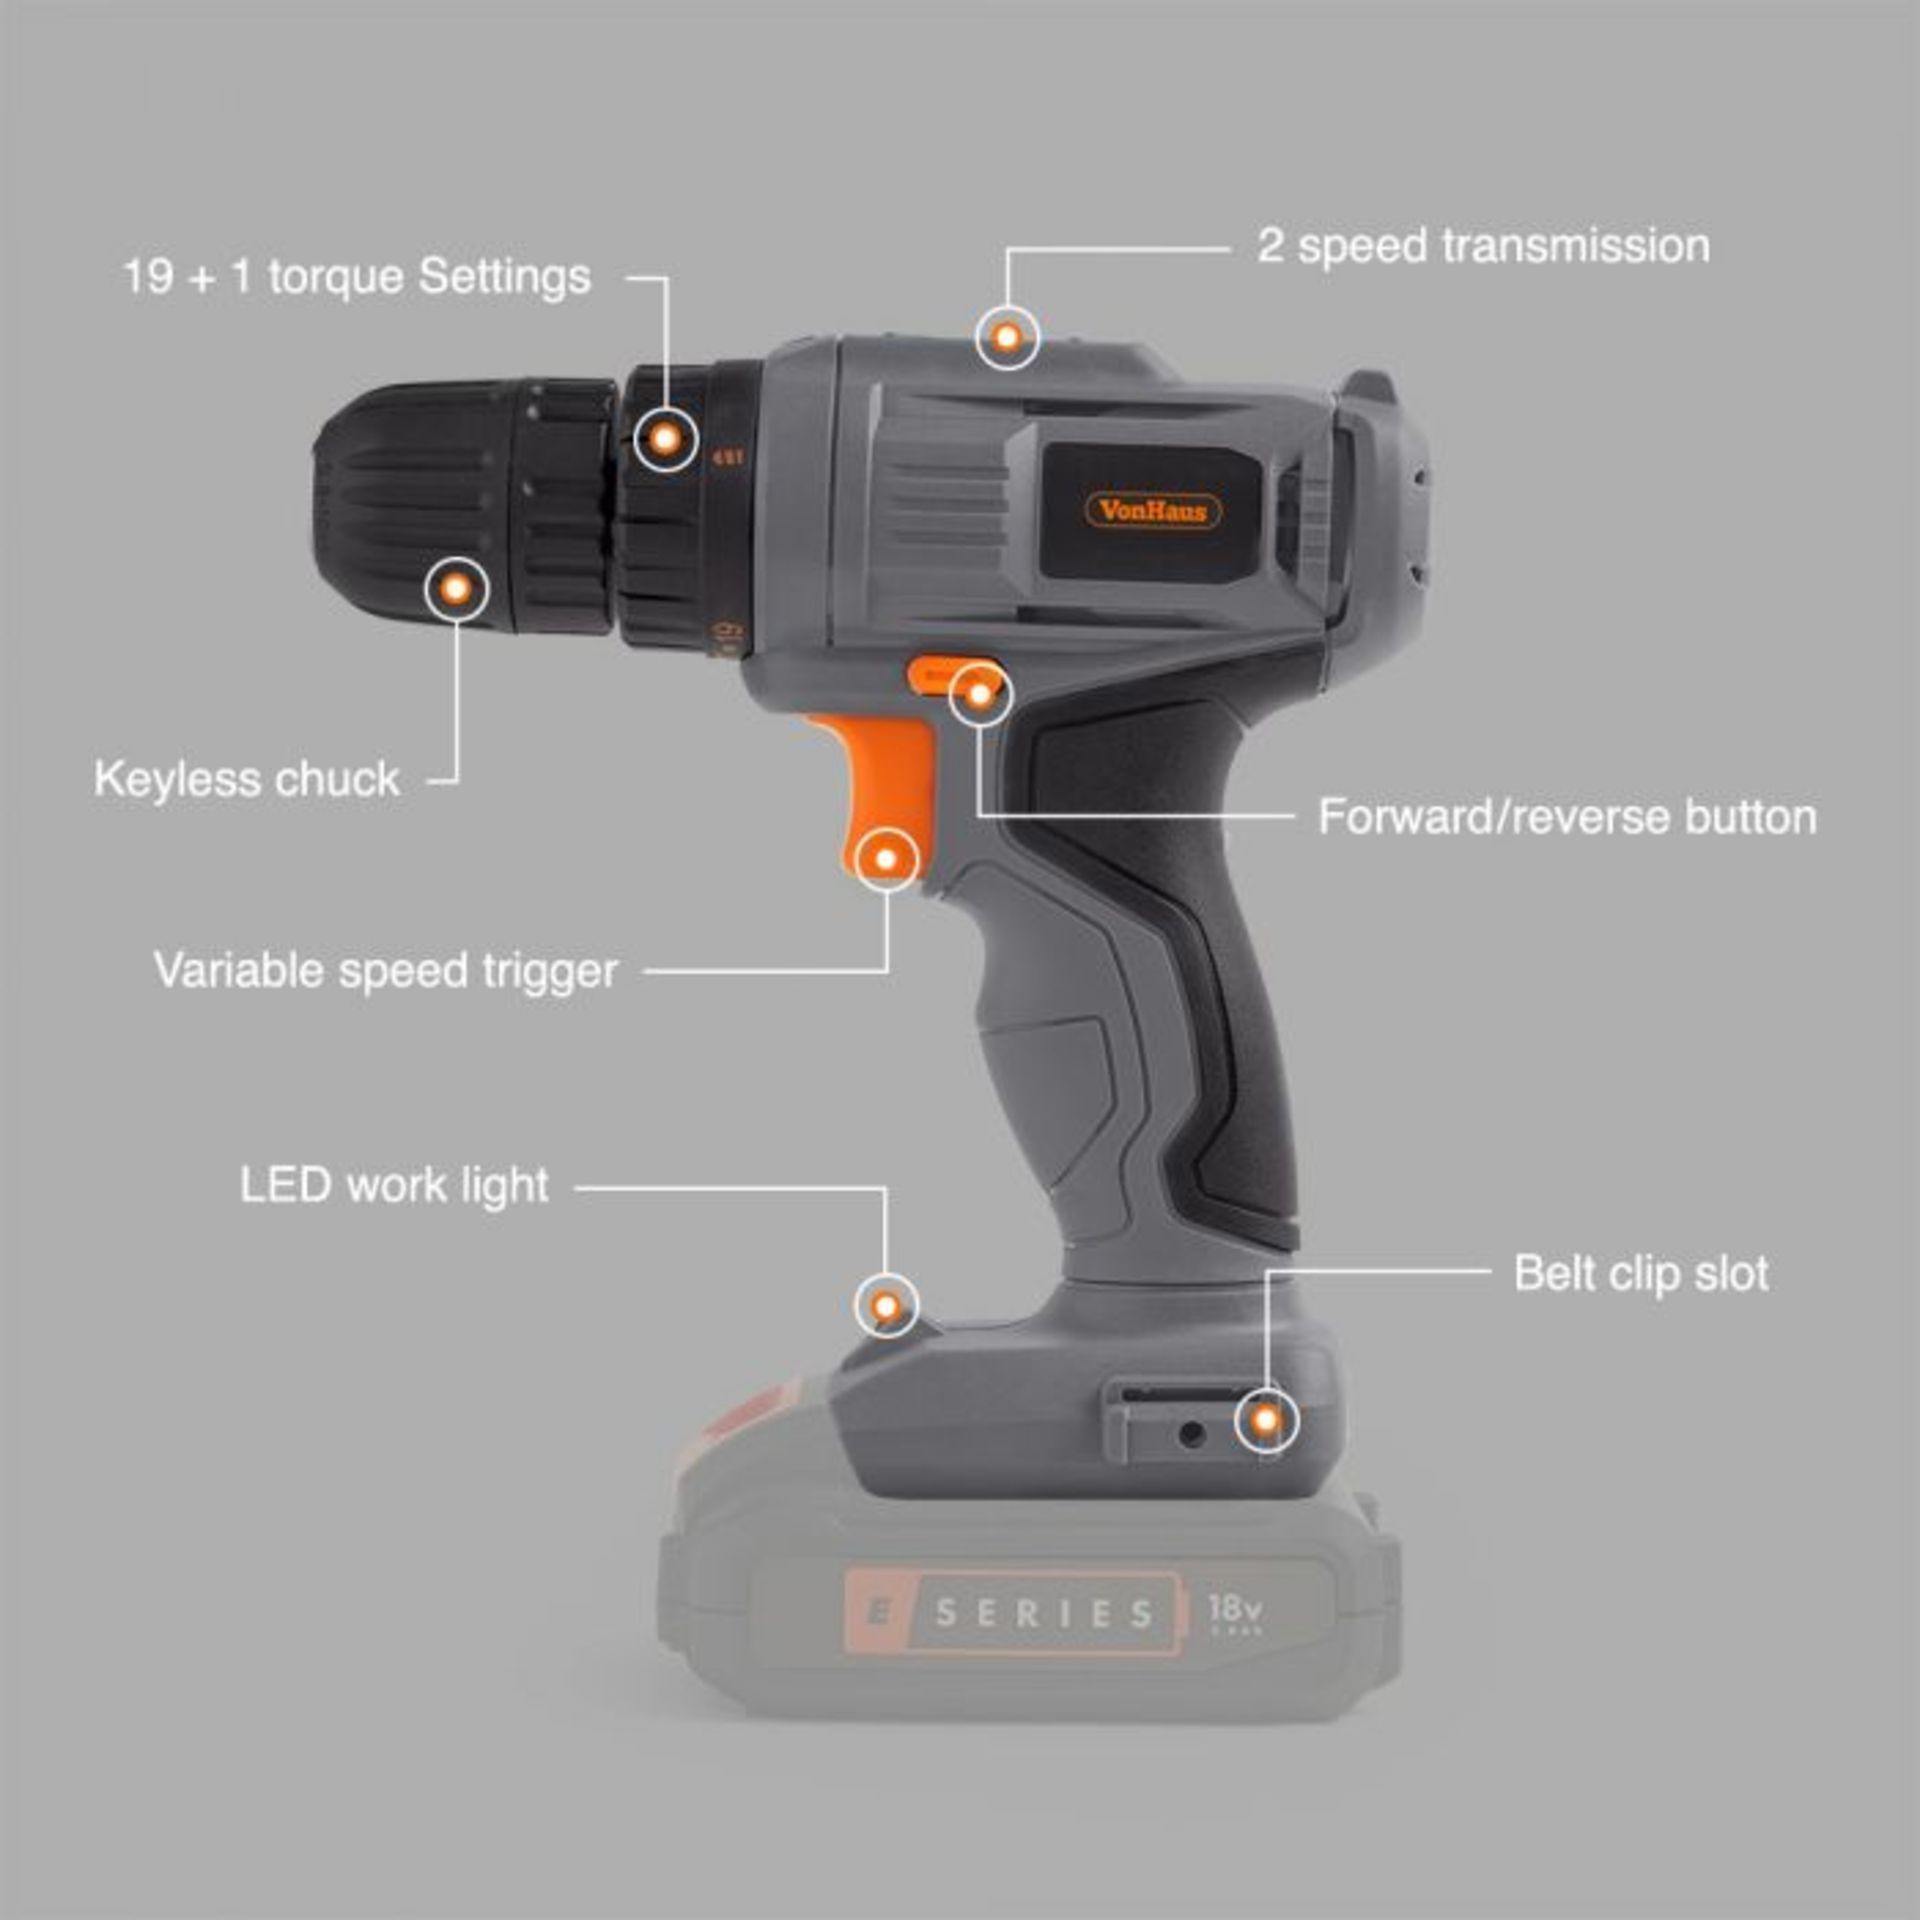 3 x New & Boxed E-Series 18V Cordless Drill Driver. (3500166) Whether you’re putting up a curtain